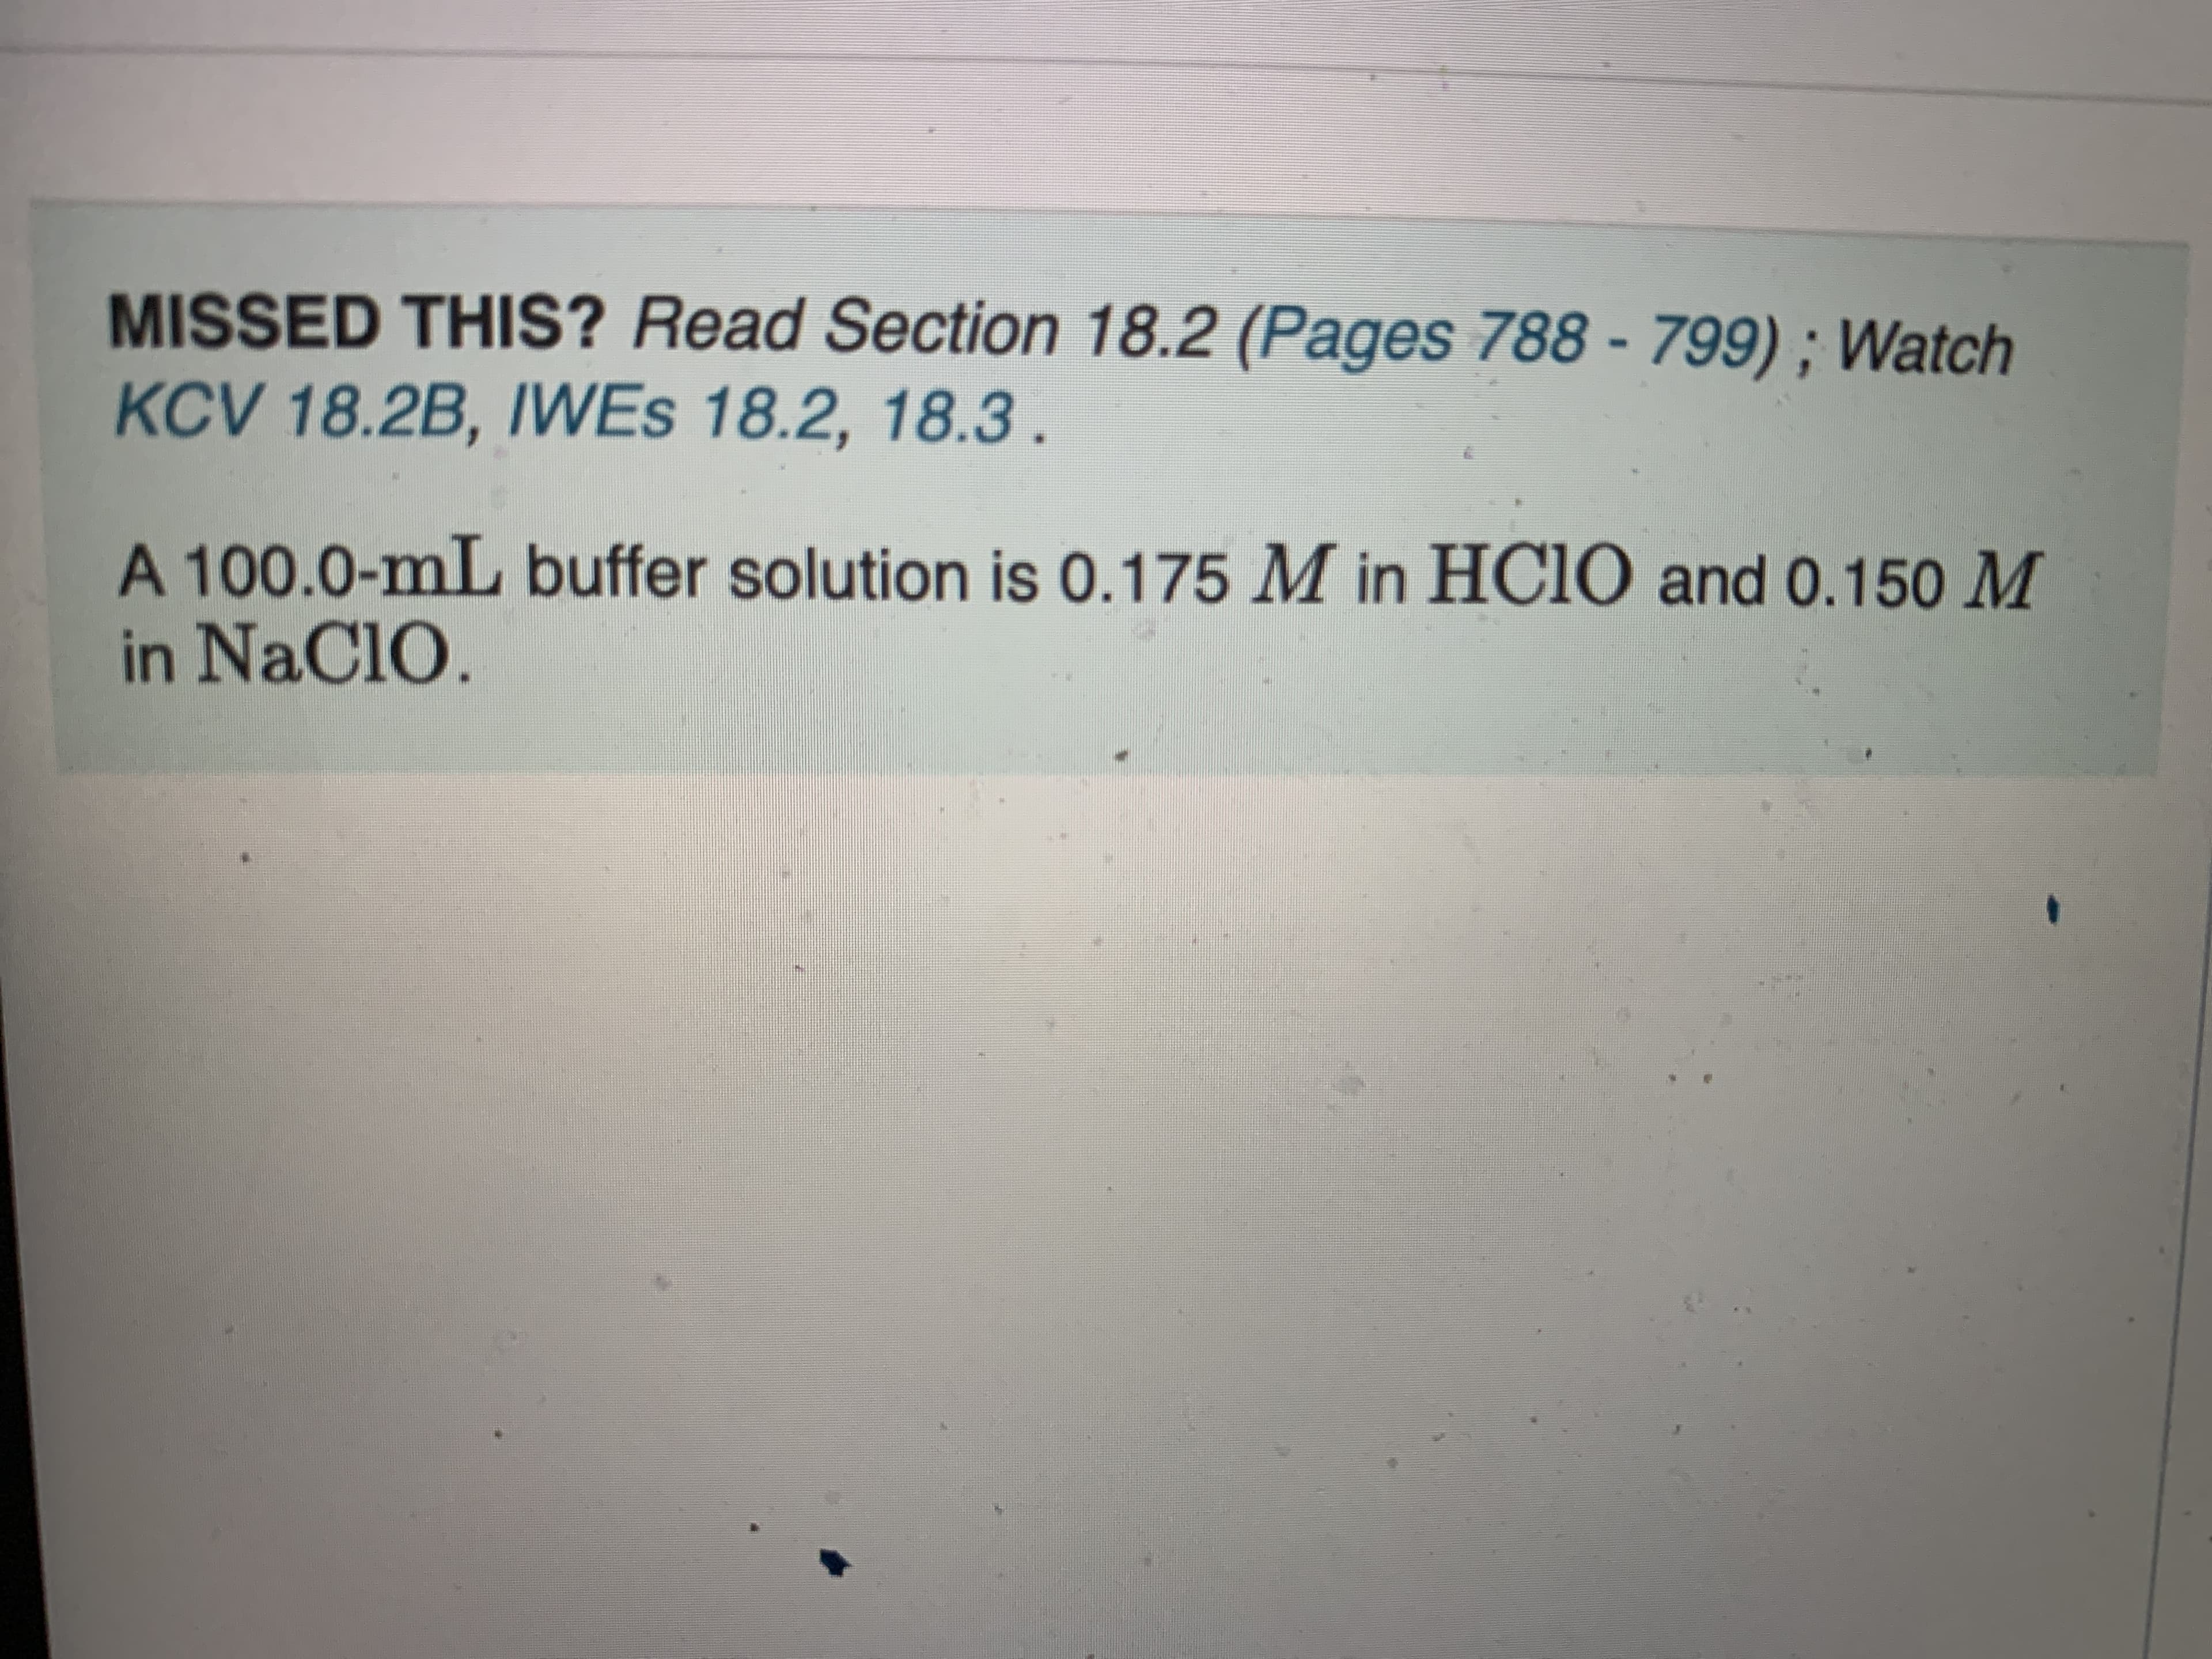 MISSED THIS? Read Section 18.2 (Pages 788 - 799) ; Watch
KCV 18.2B, IWES 18.2, 18.3.
A 100.0-mL buffer solution is 0.175 M in HC1O and 0.150 M
in NaClO.
